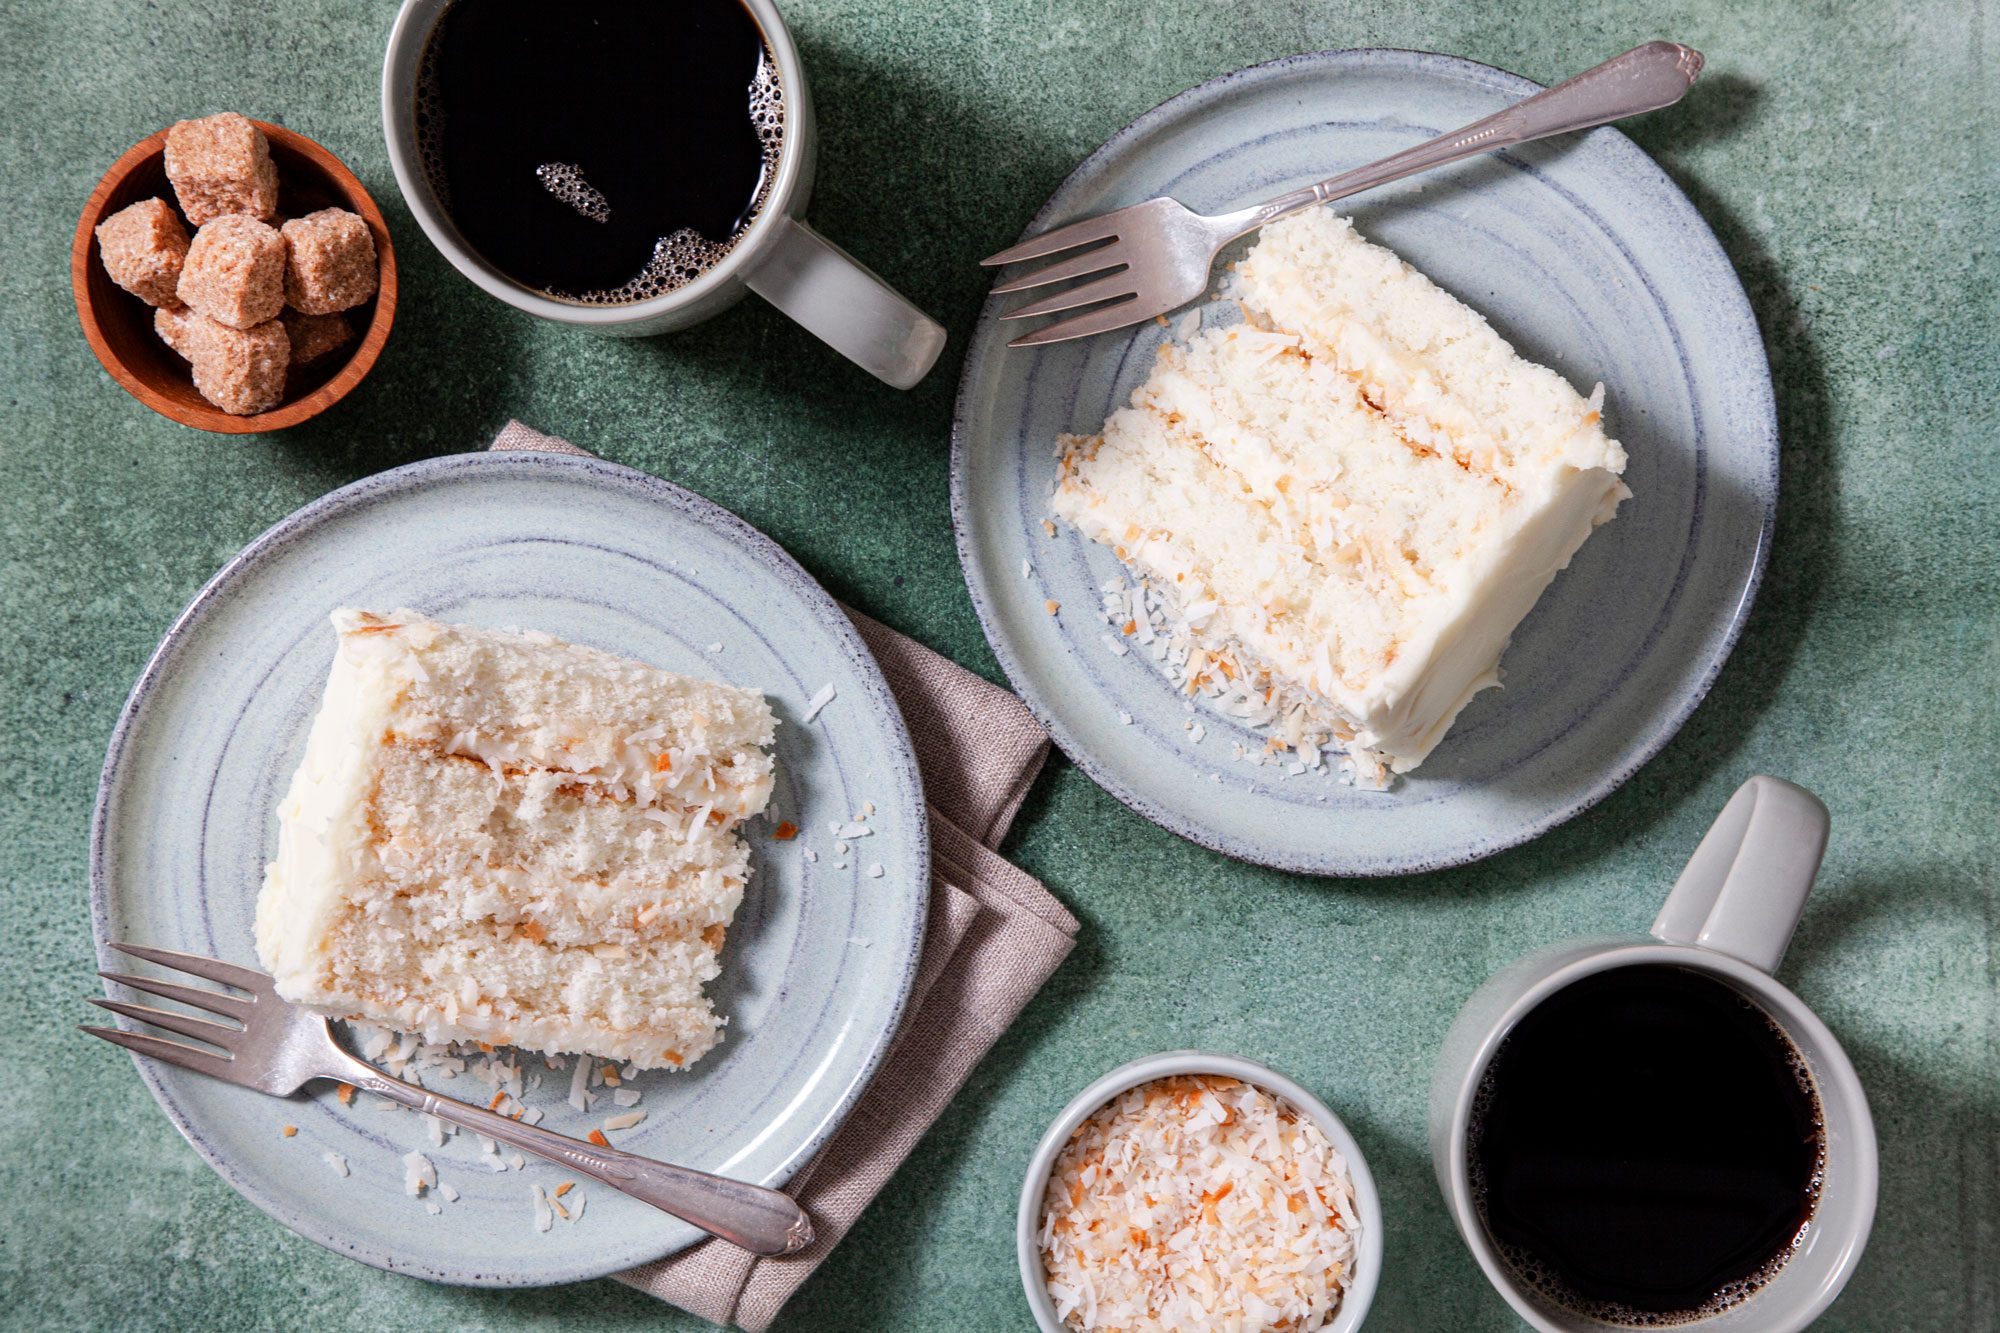 Two slices of Incredible Coconut Cake on a plate, accompanied by two cups of coffee